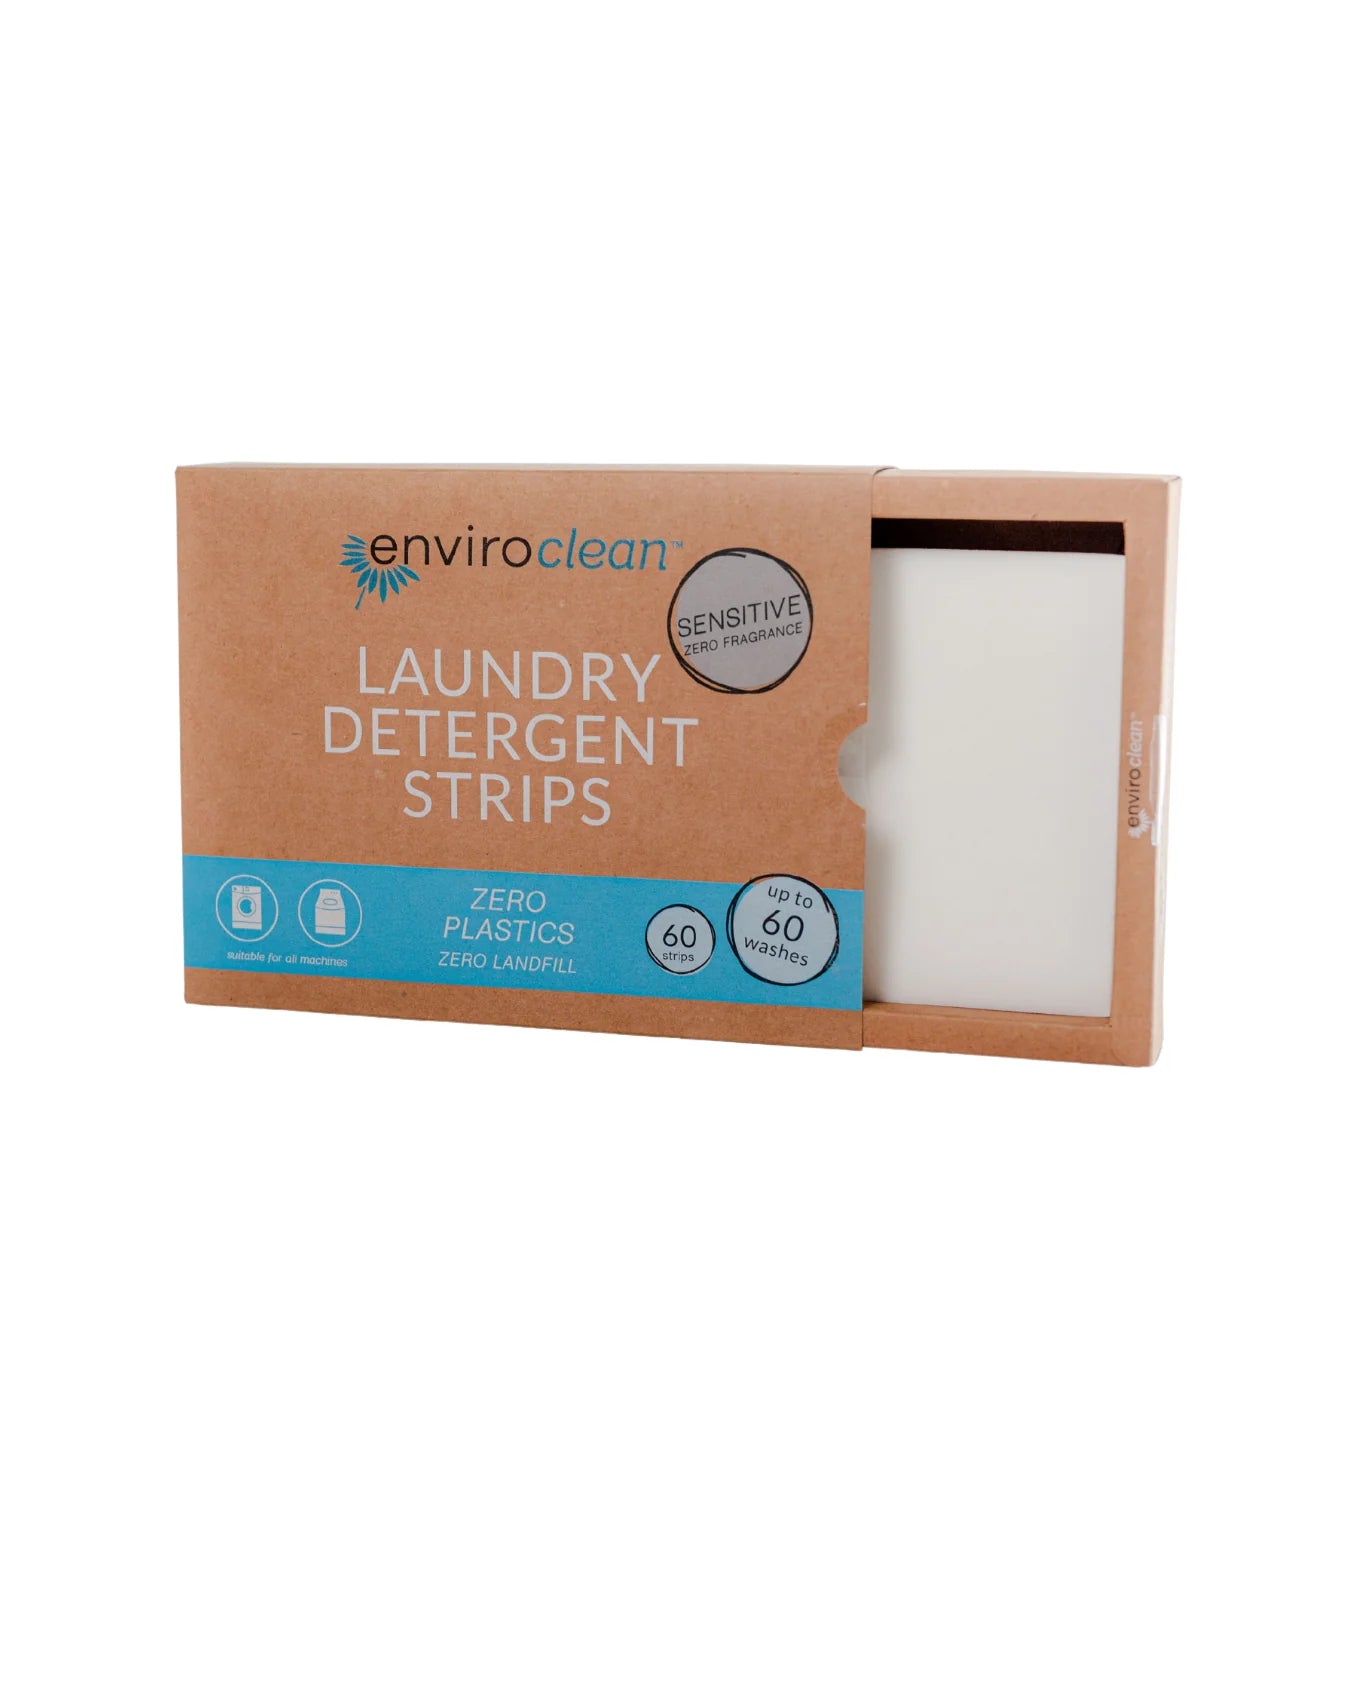 Envirocare earth – Sensitive Laundry Detergent Strips *Clearance*